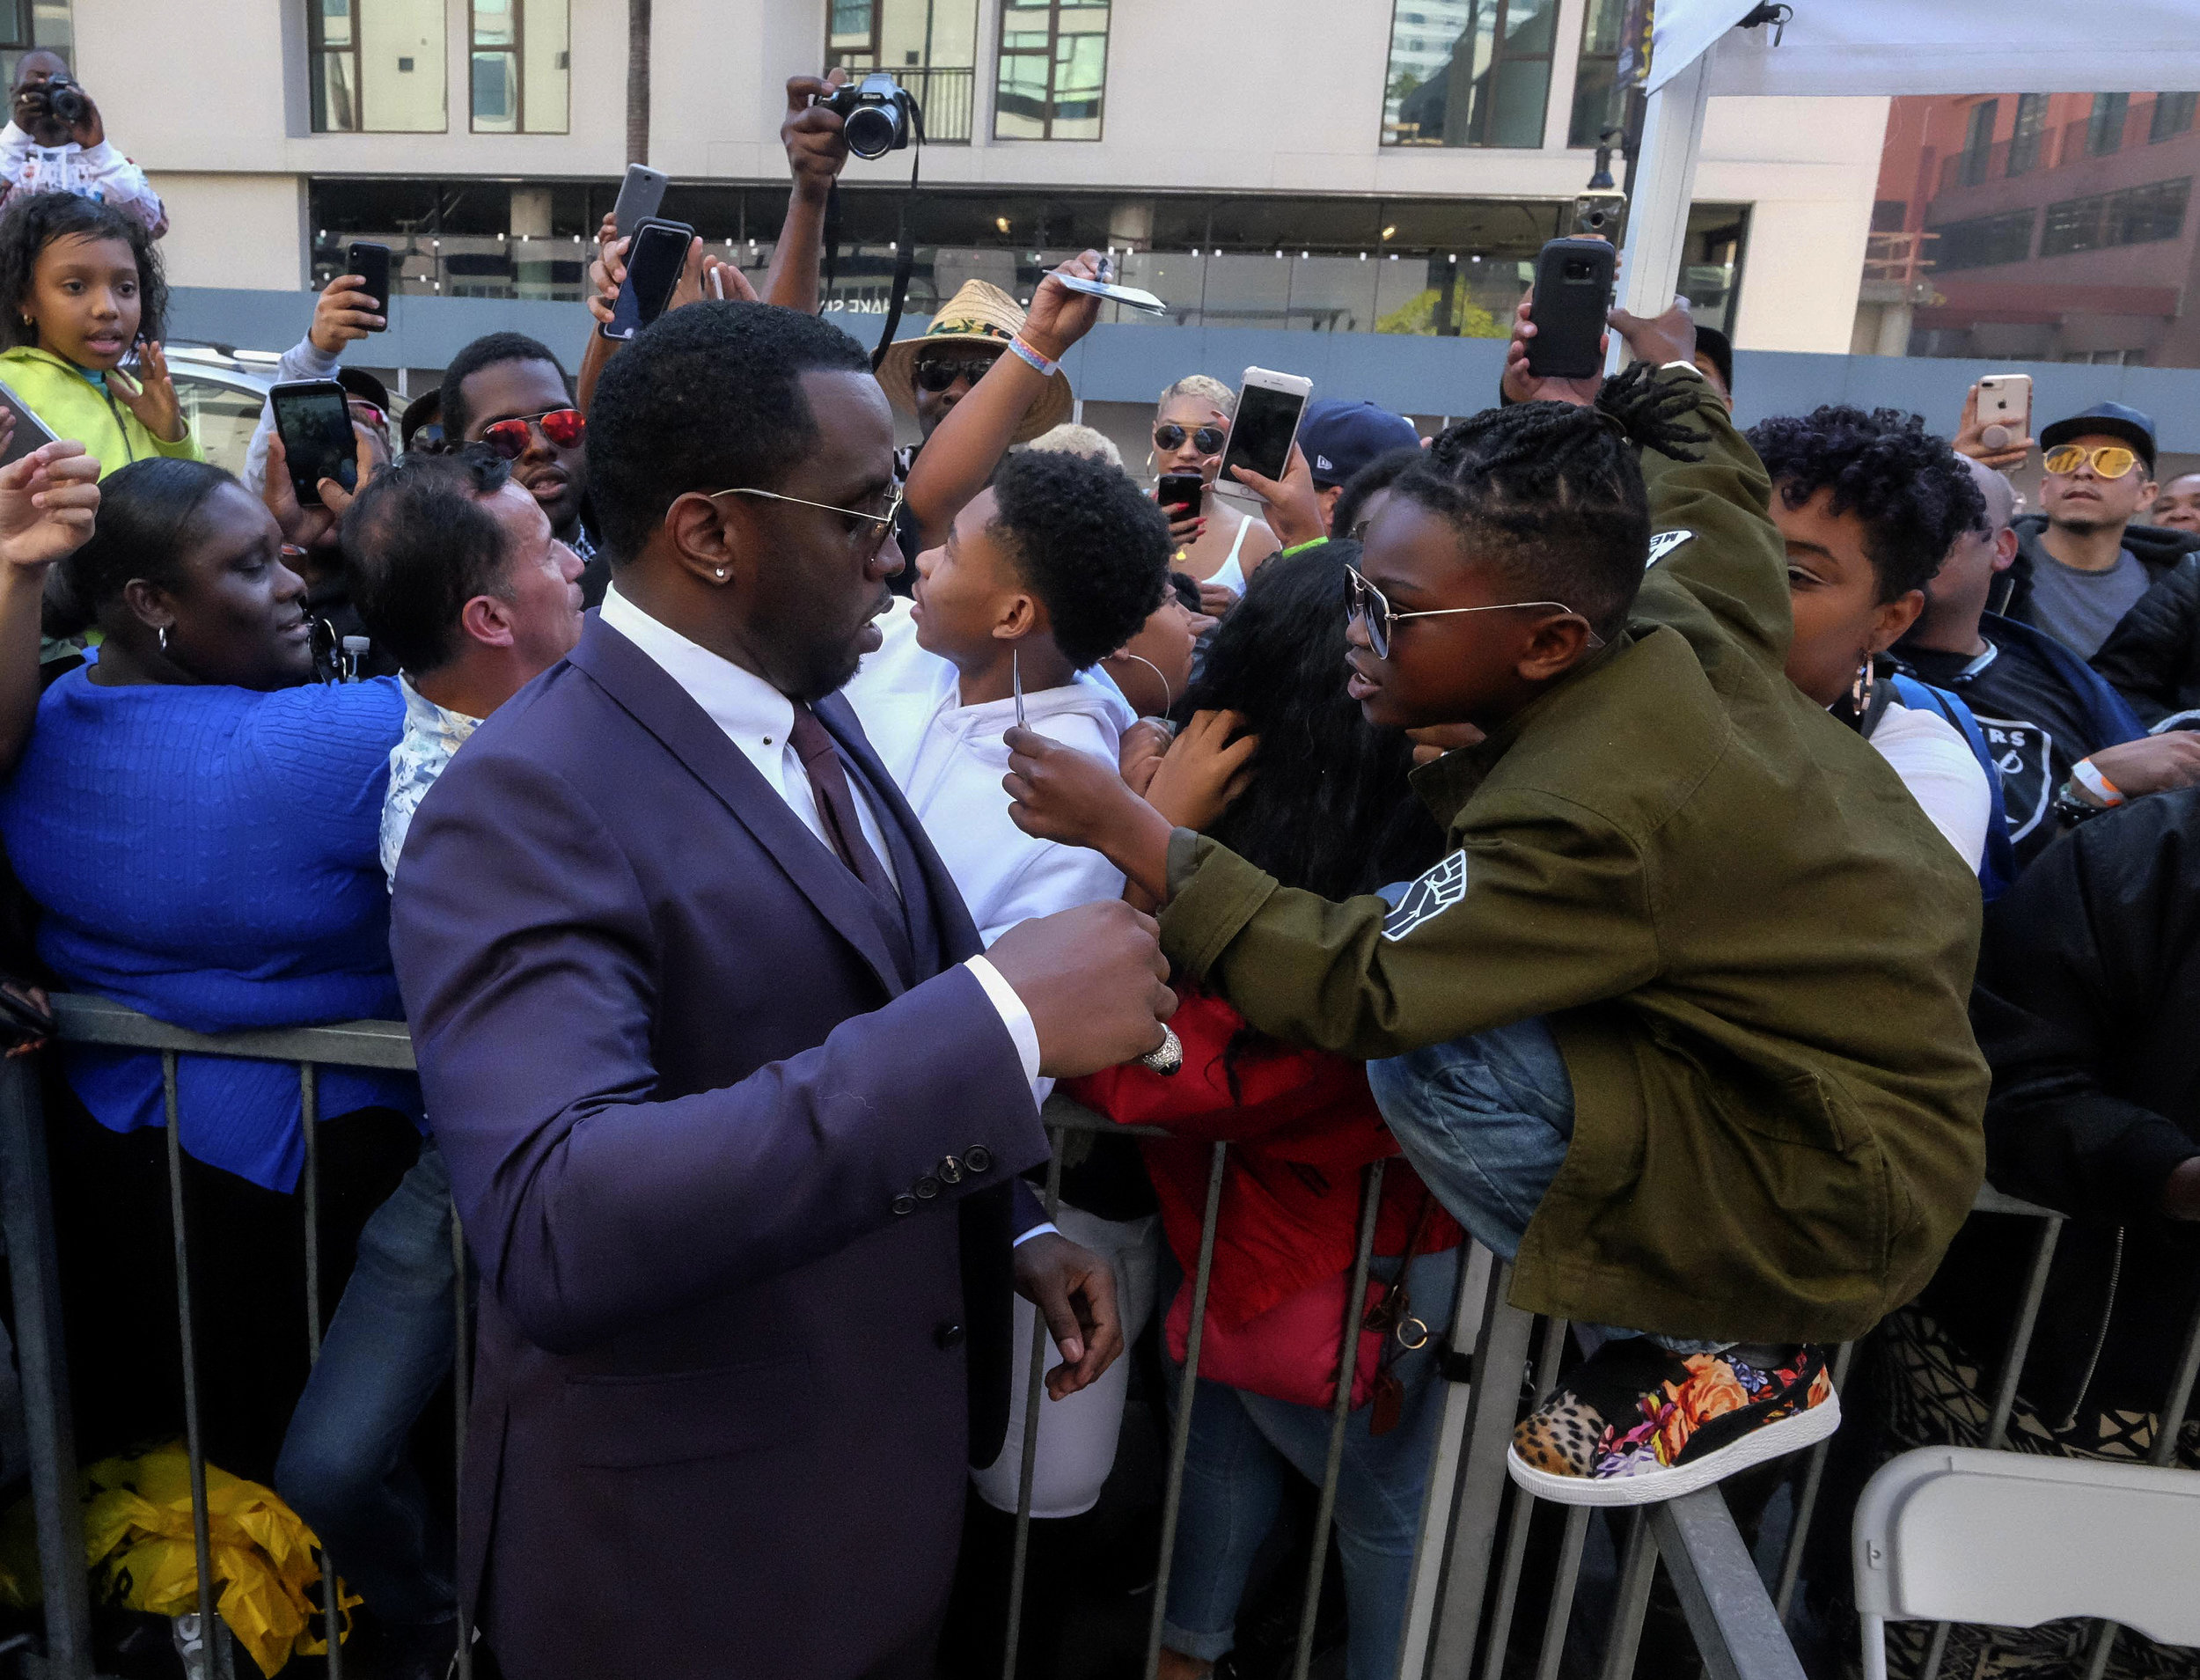  A young fan asks Sean 'Diddy' Combs for an autograph as he attends the ceremony honoring Mary J. Blige with a Star on The Hollywood Walk of Fame held on January 11, 2018 in Hollywood, California. 